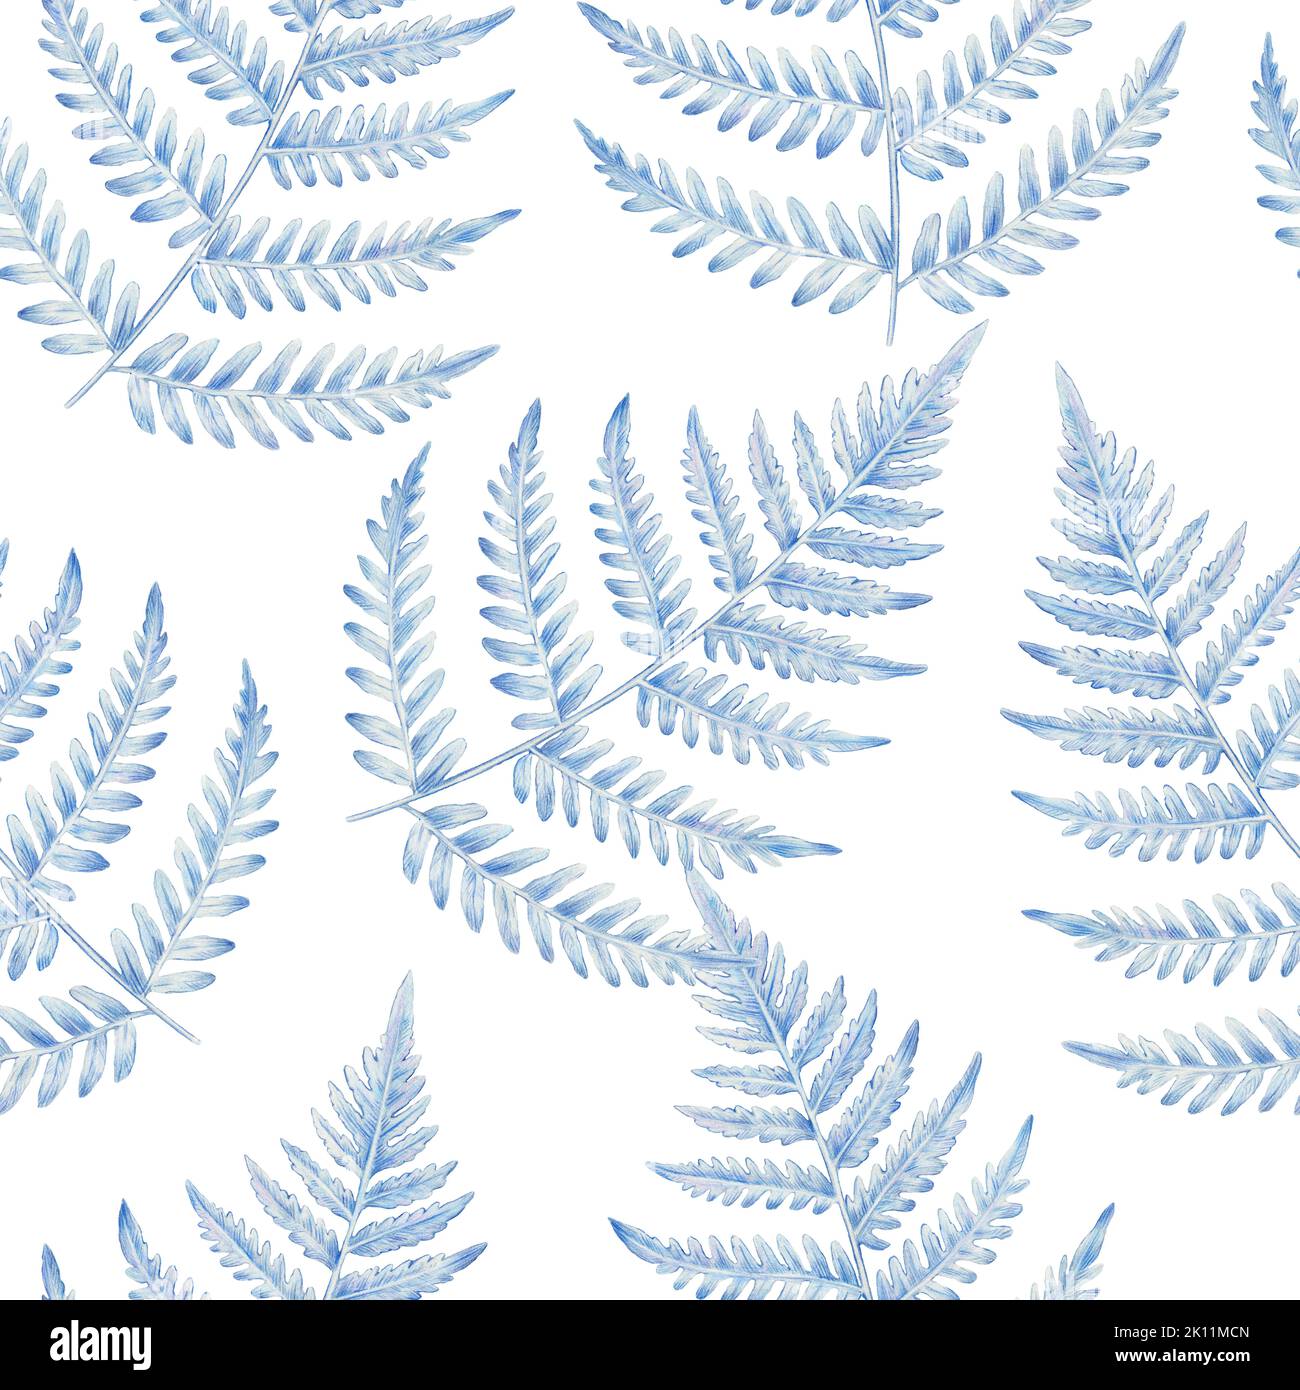 Hand drawn seamless pattern with fern leaves. Detailed watercolor botanical illustration. Stock Photo